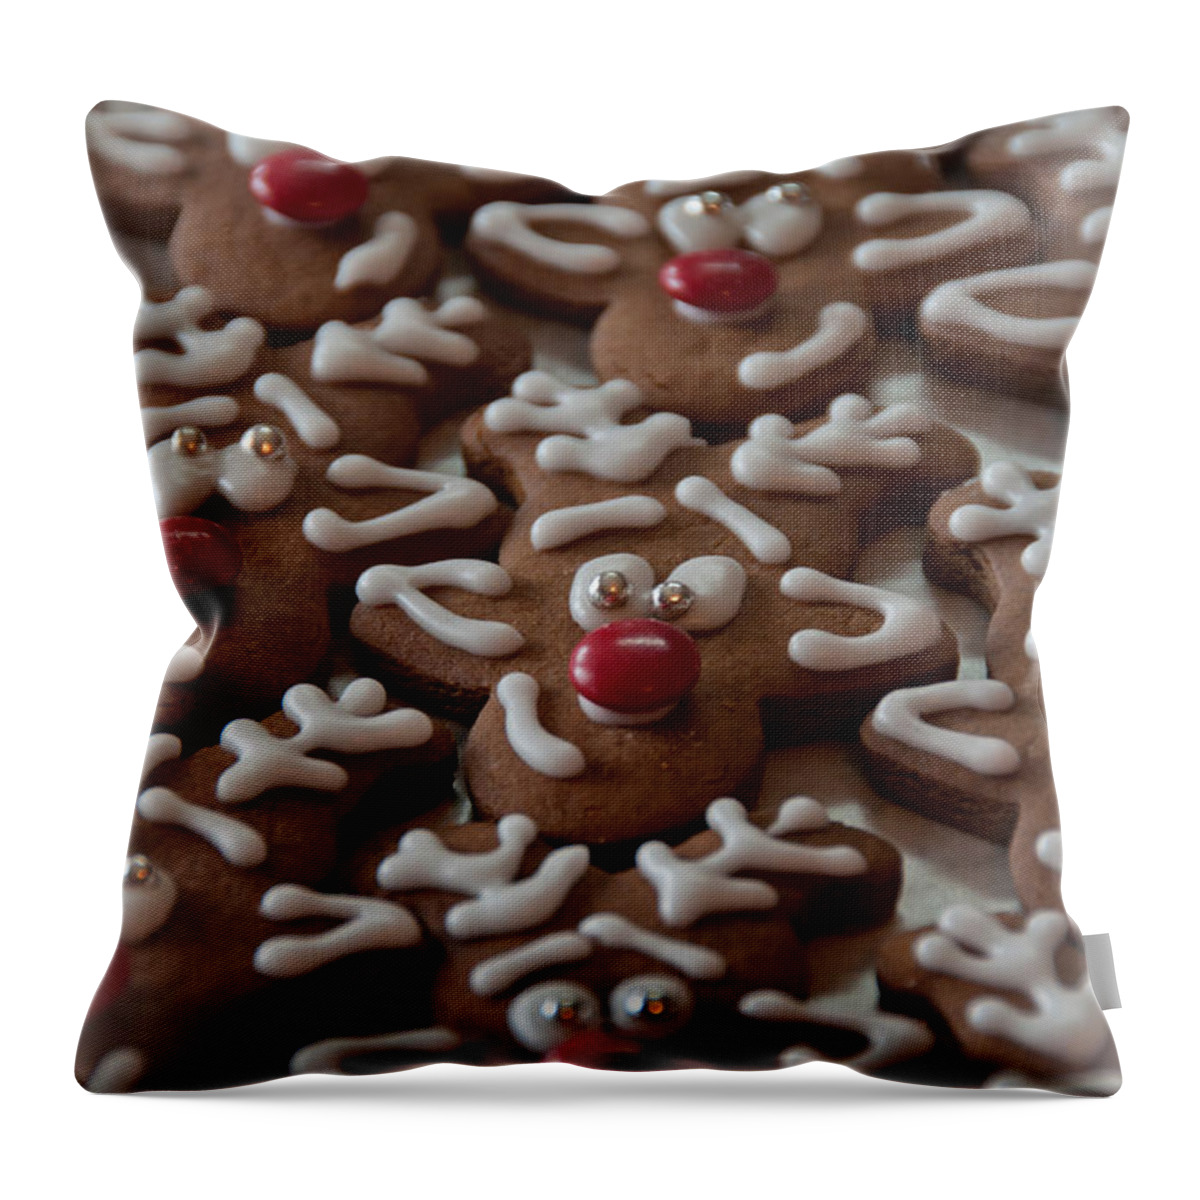 Cookies Throw Pillow featuring the photograph Christmas Baking by Cheryl Baxter